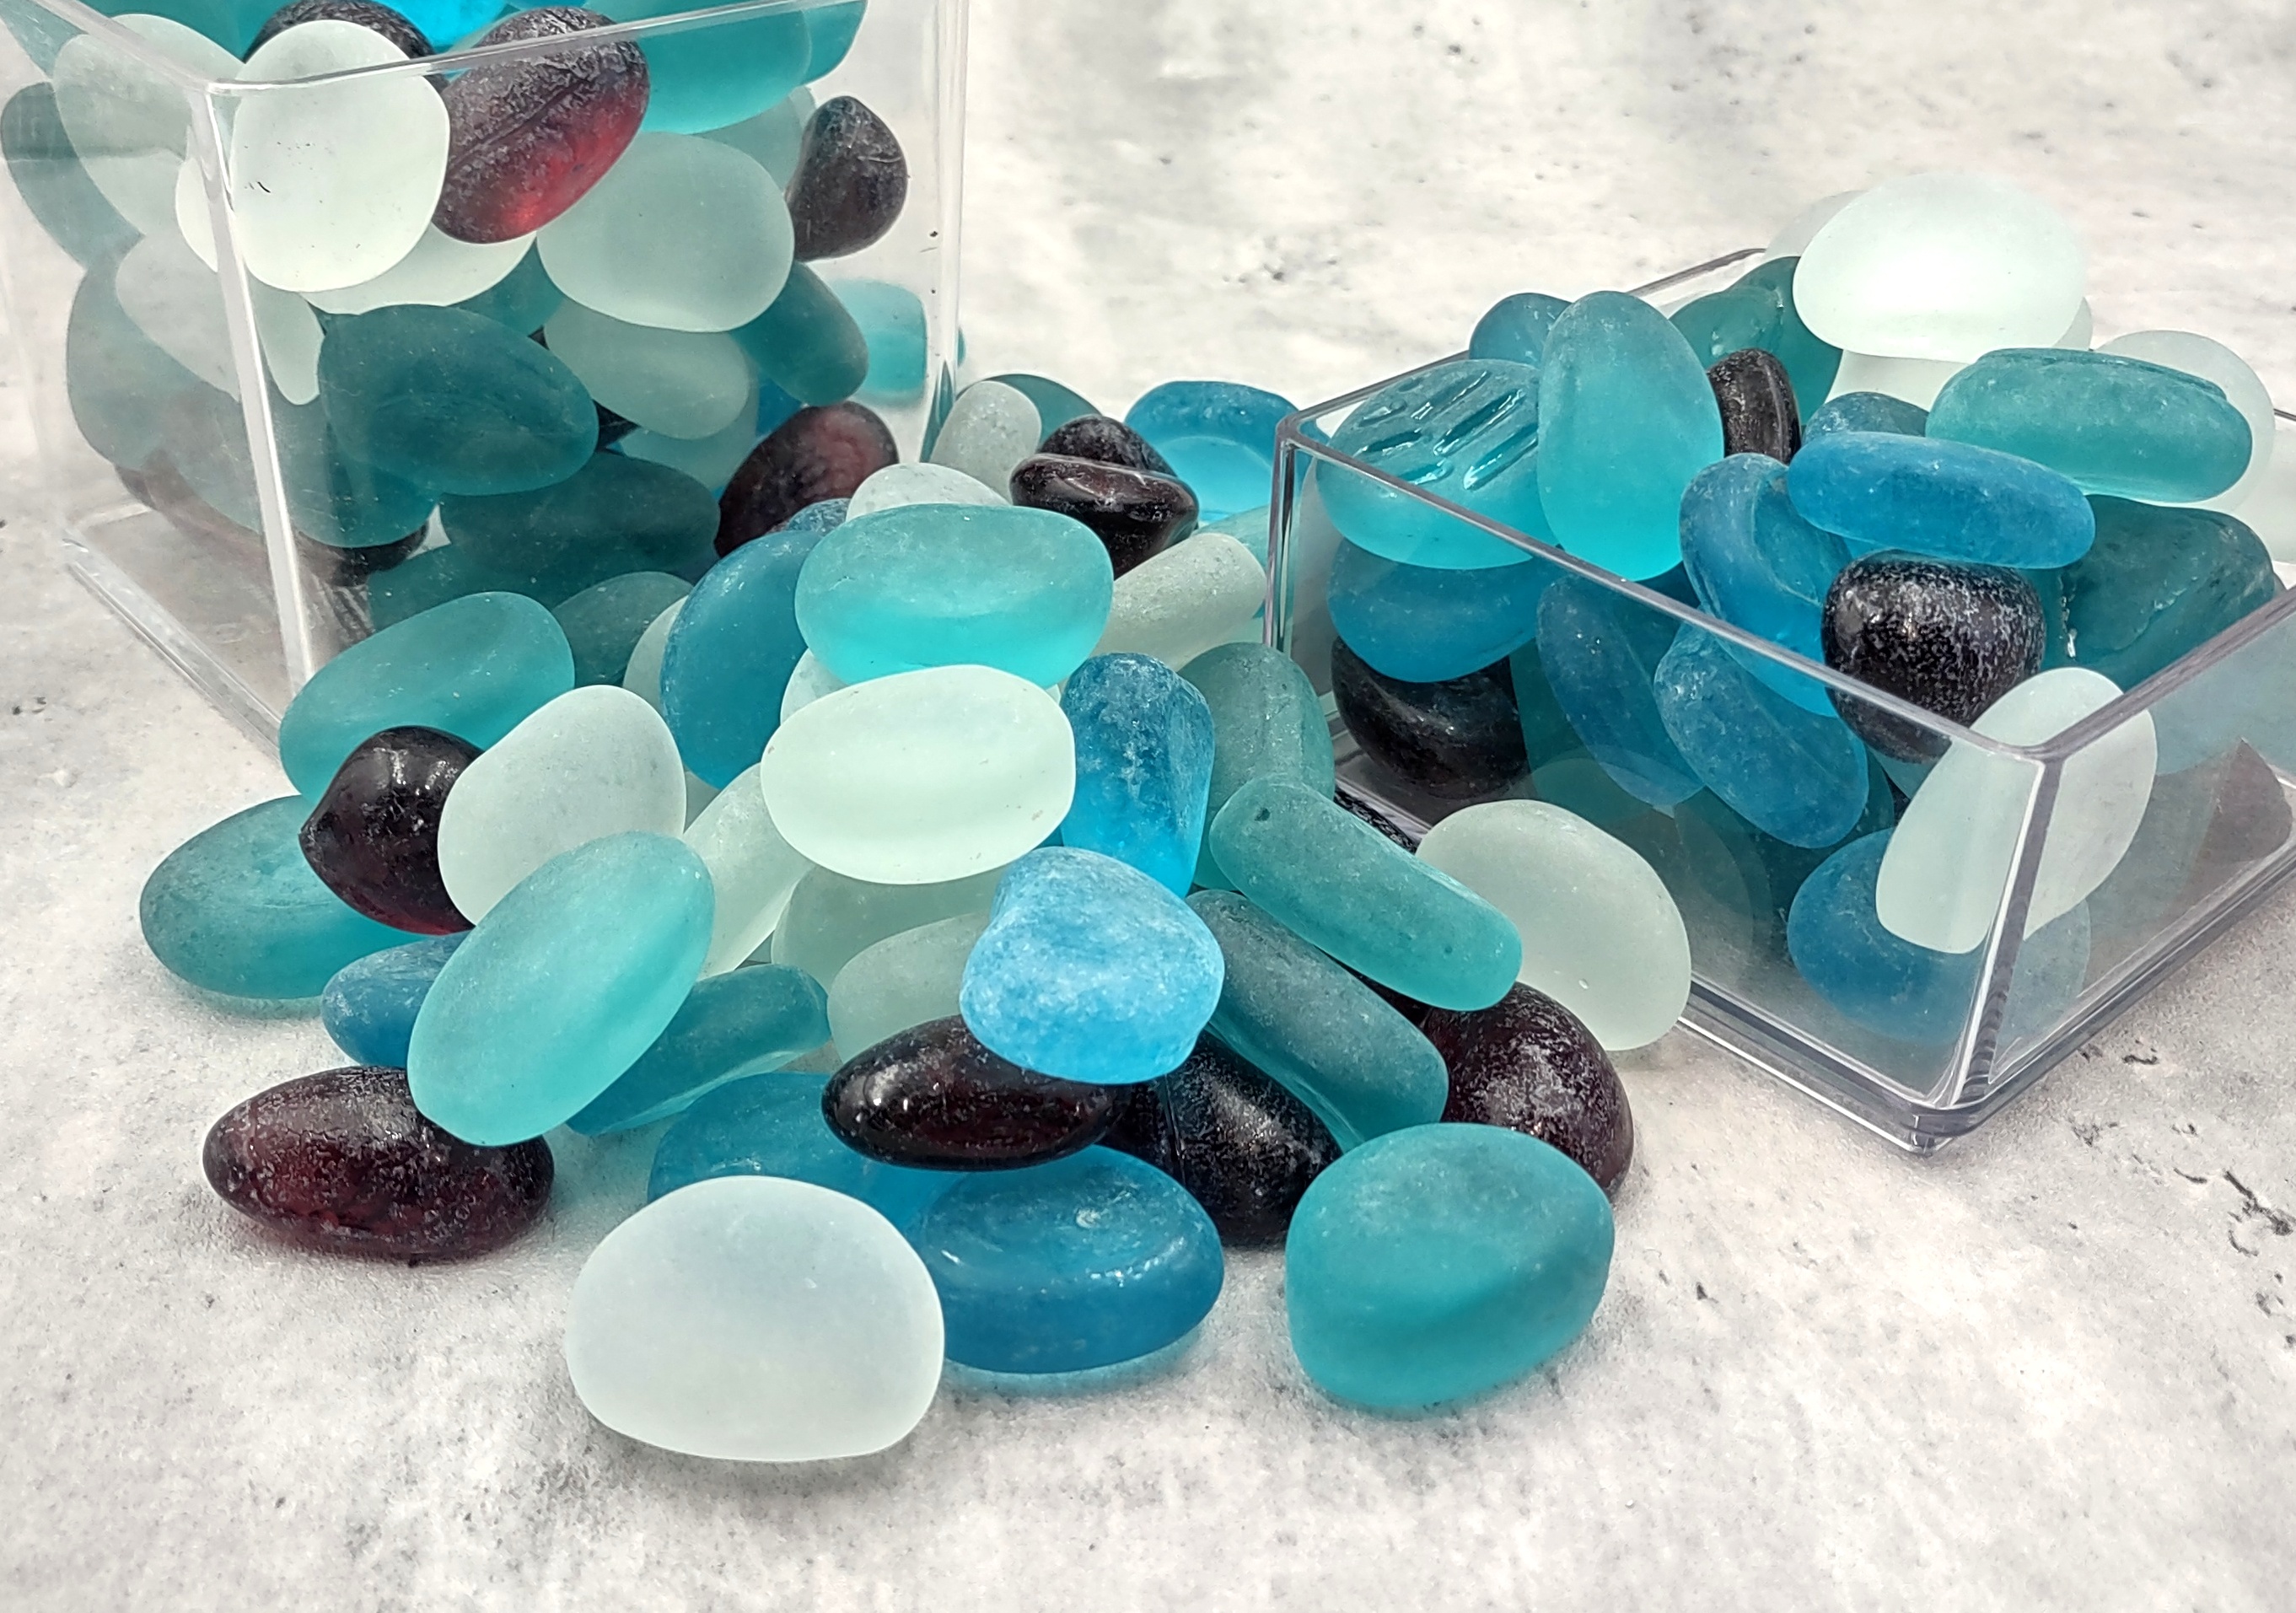 Beach Sea Glass Rounded Turquoise Blue Frosted Tumbled Pebbles (approx. 1  Kilogram or 2.2 lbs. 1-1.5 inch) Man Made Arts & Crafts Sea Glass!